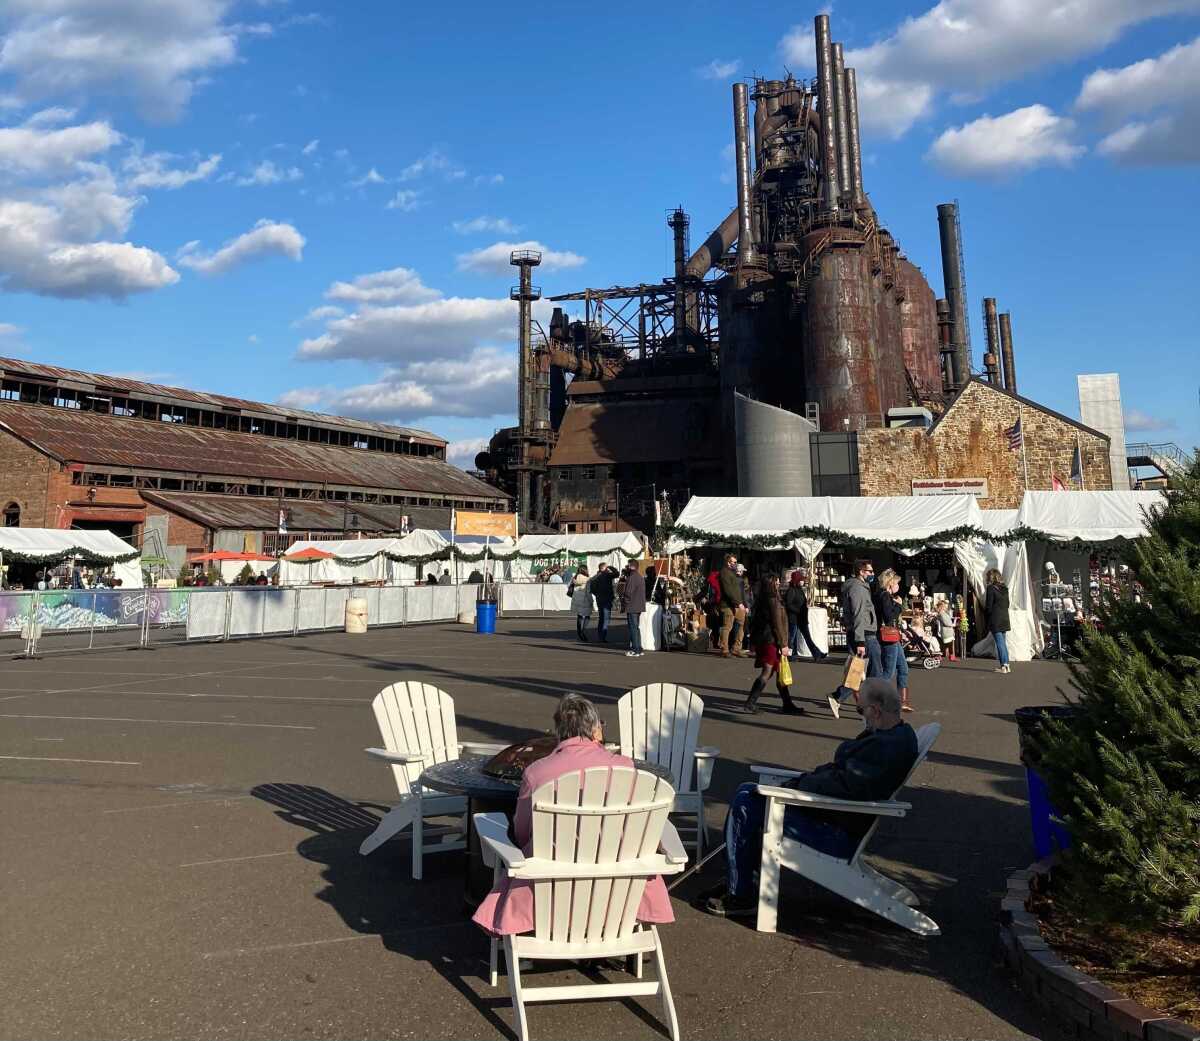 More than 50 vendors participated in Christkindlmarkt, which was held outdoors near the Bethlehem Steel blast furnace.